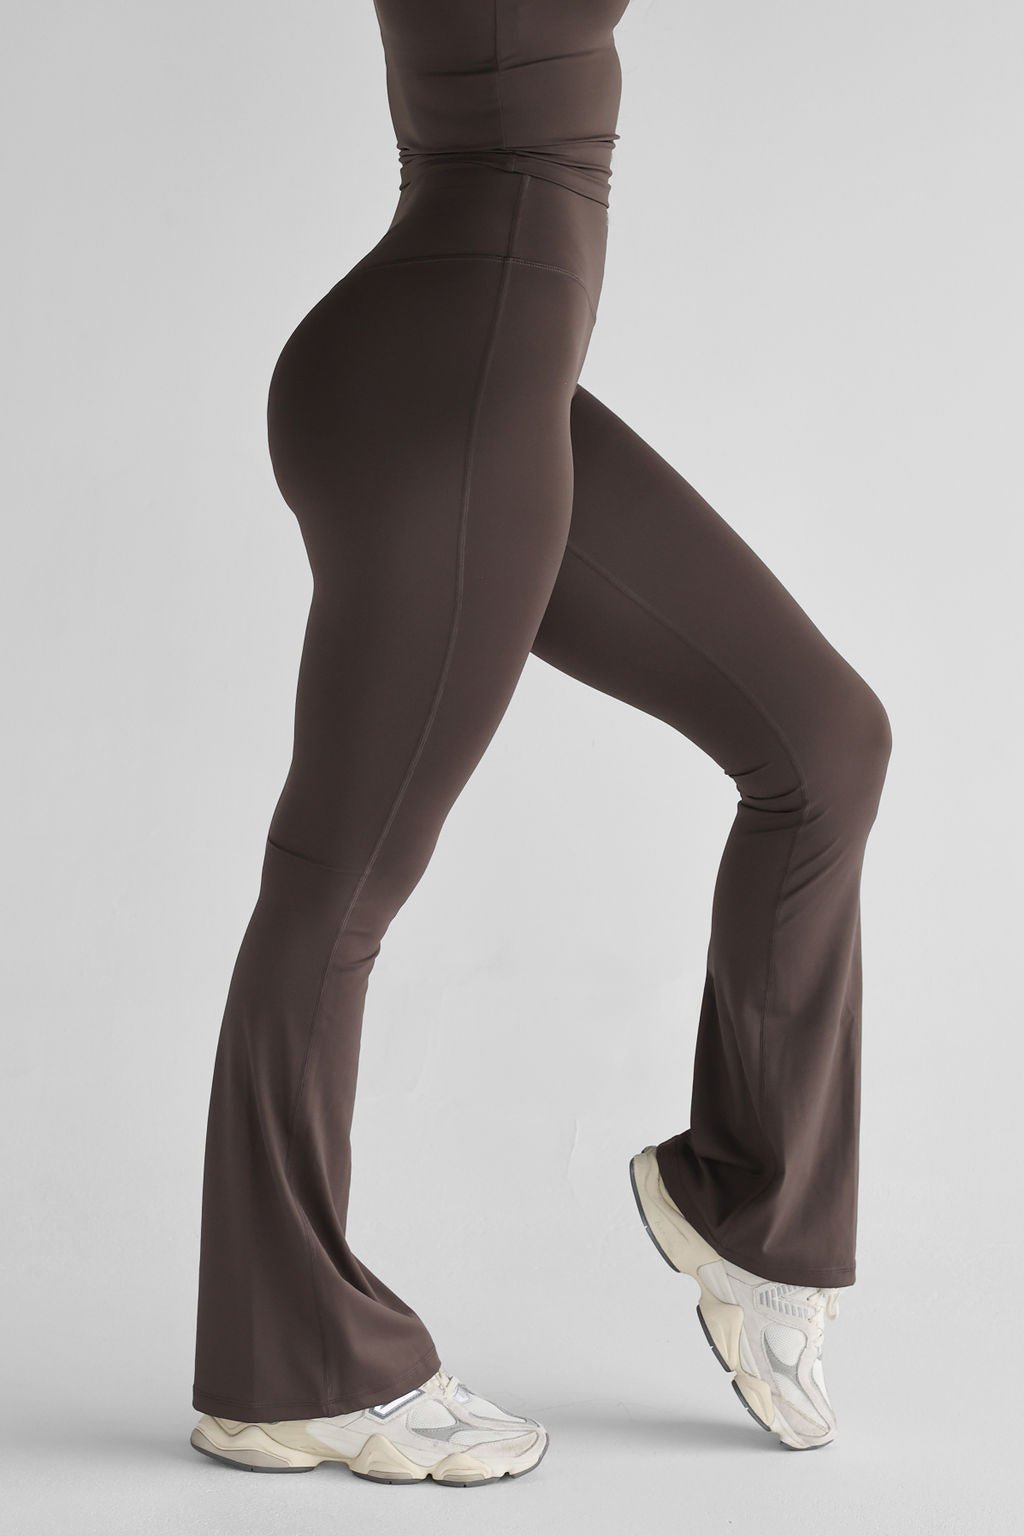 SCULPT Flare Leggings - Dark Chocolate SHIPPING FROM 23/08 - 25/08 - LEELO ACTIVE